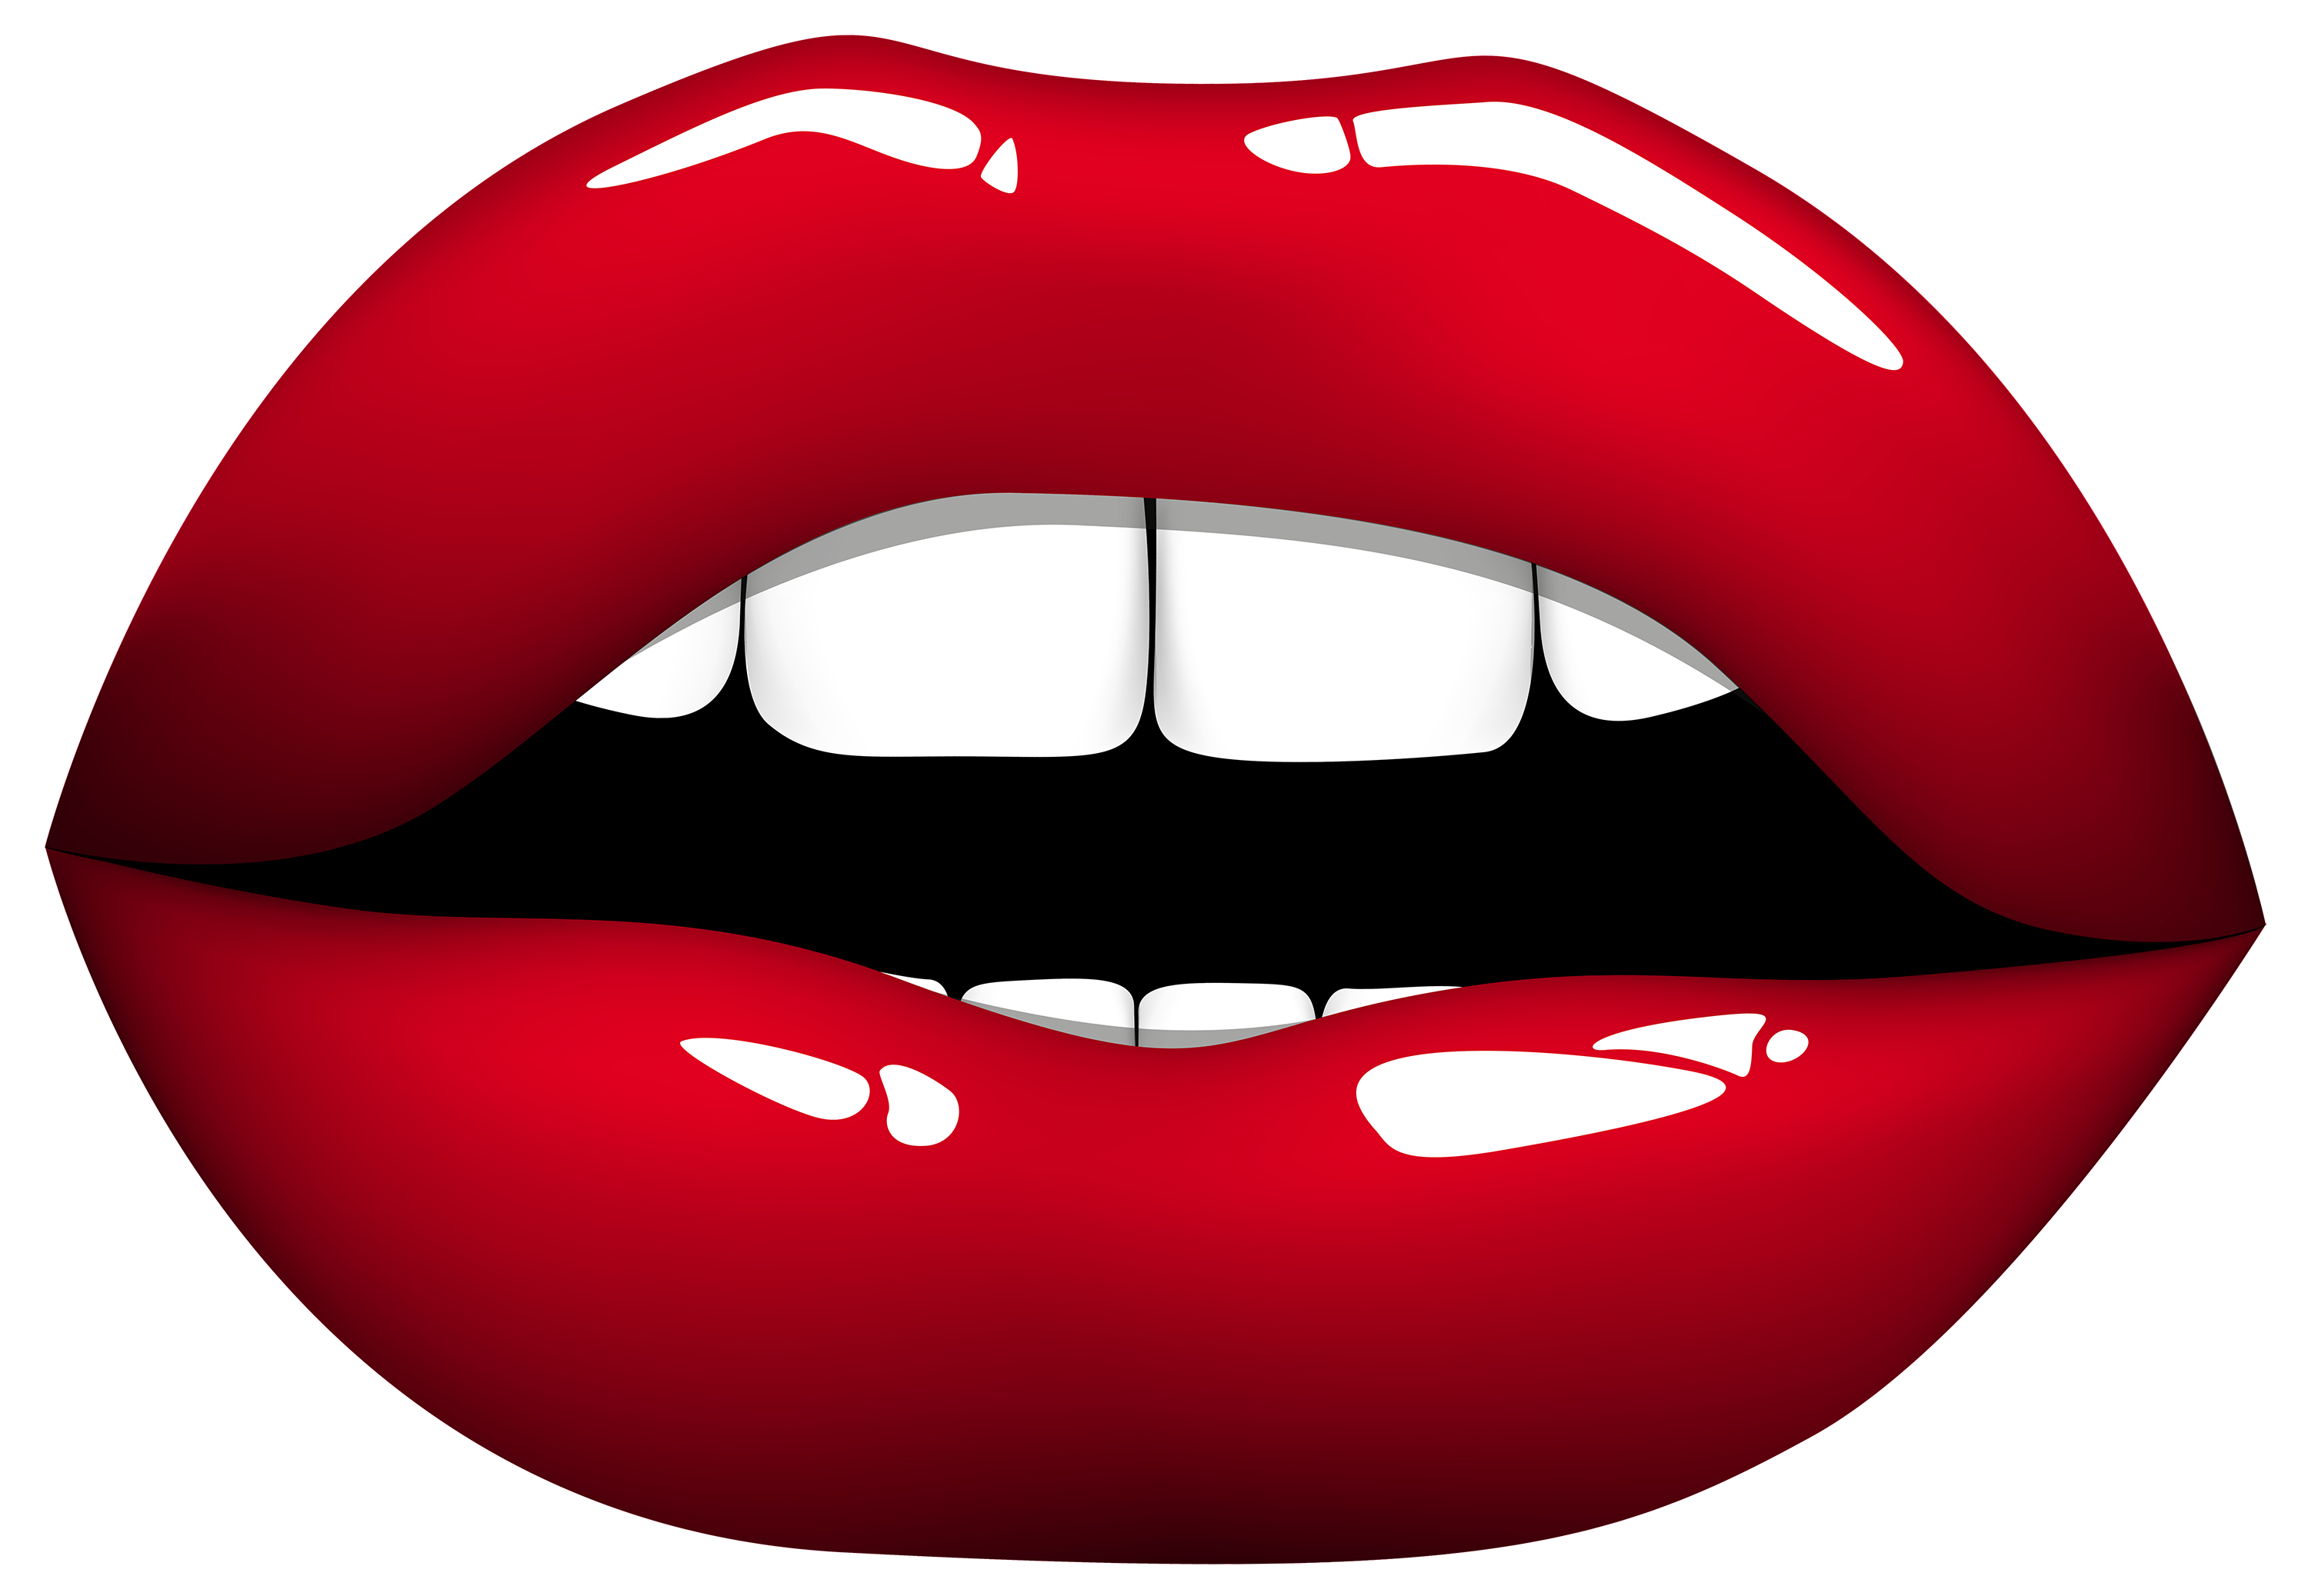 Cute red lips clipart